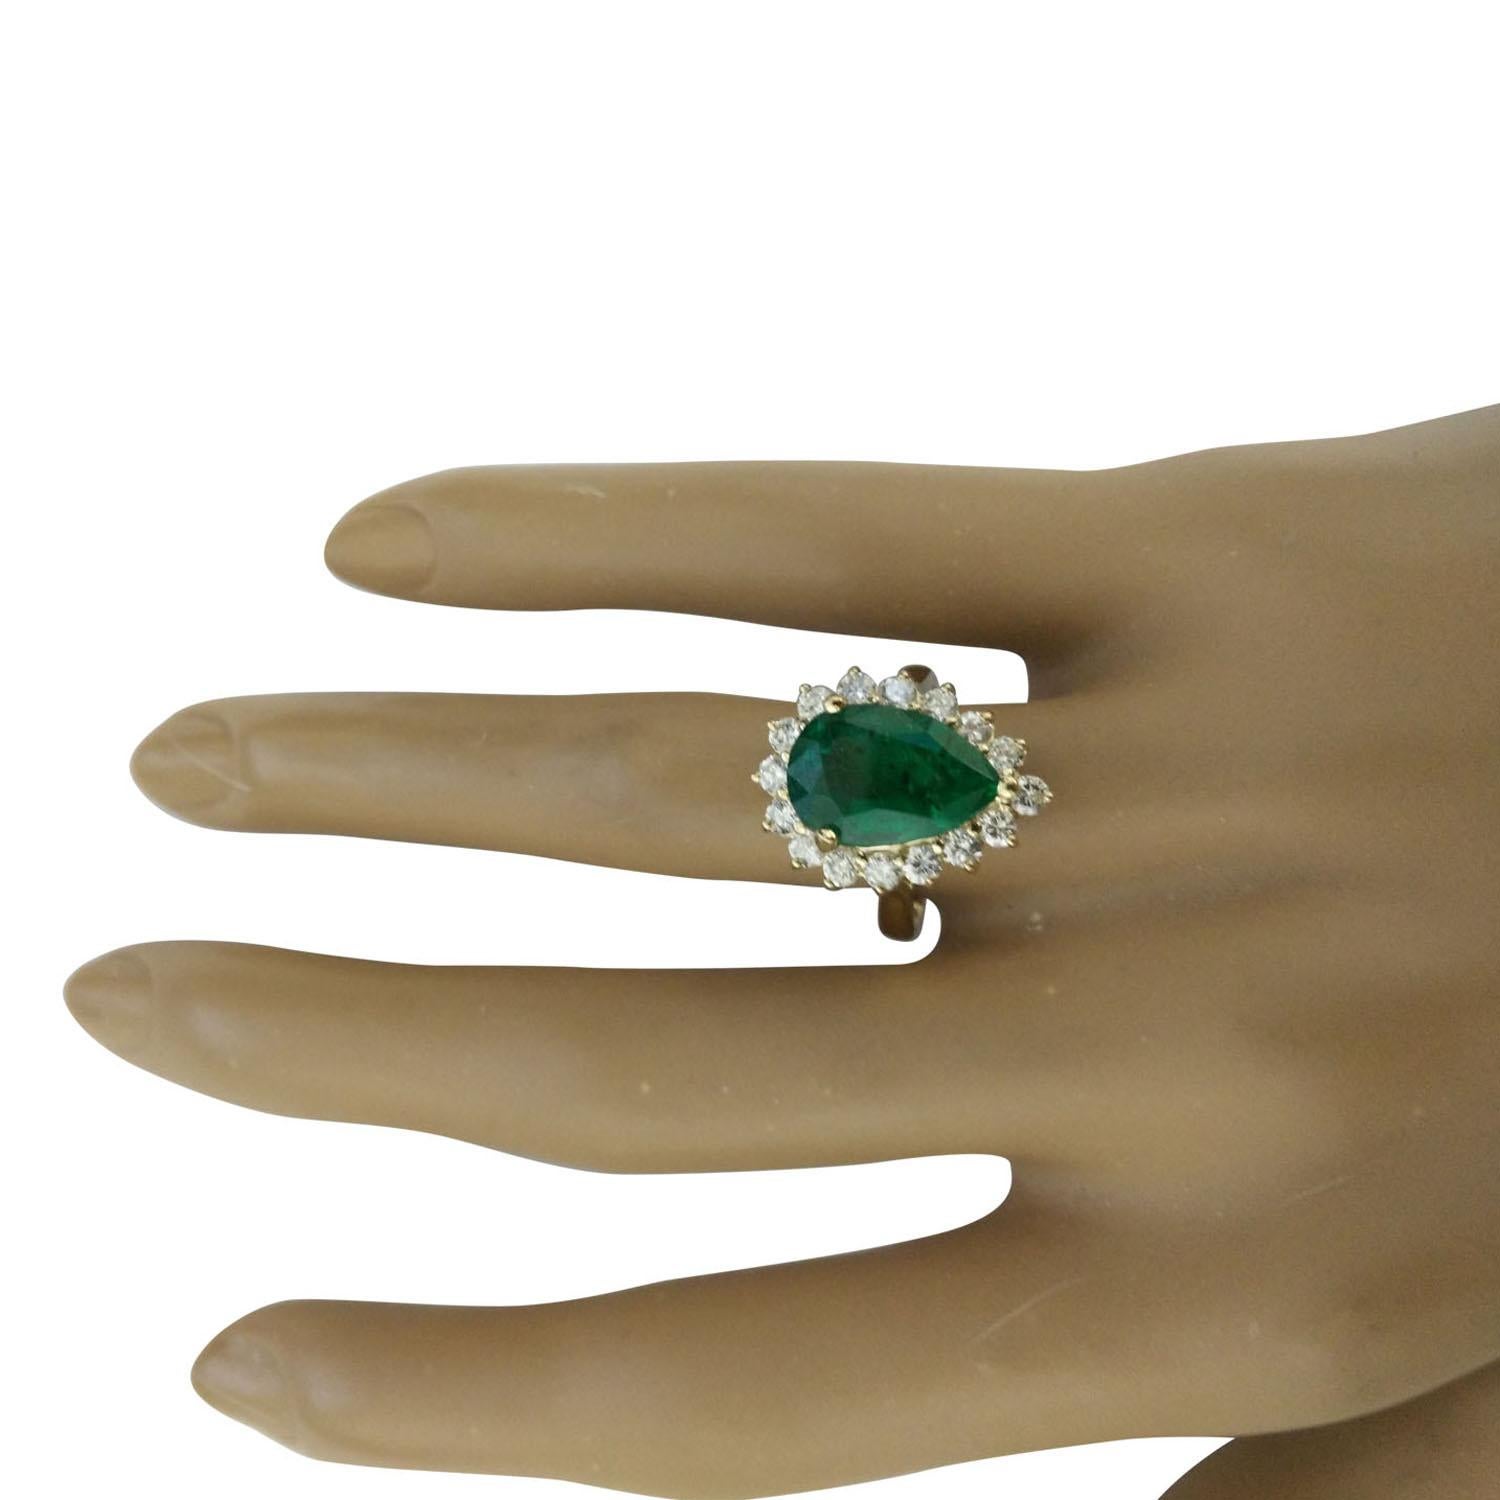 4.55Carat Natural Emerald 14 Karat Solid Yellow Gold Diamond Ring
Stamped: 14K
Total Ring Weight: 5.1 Grams 
Emerald Weight: 3.60 Carat (14.00x9.00 Millimeters)  
Diamond Weight: 0.95 Carat (F-G Color, VS2-SI1 Clarity )
Face Measures: 18.95x14.35